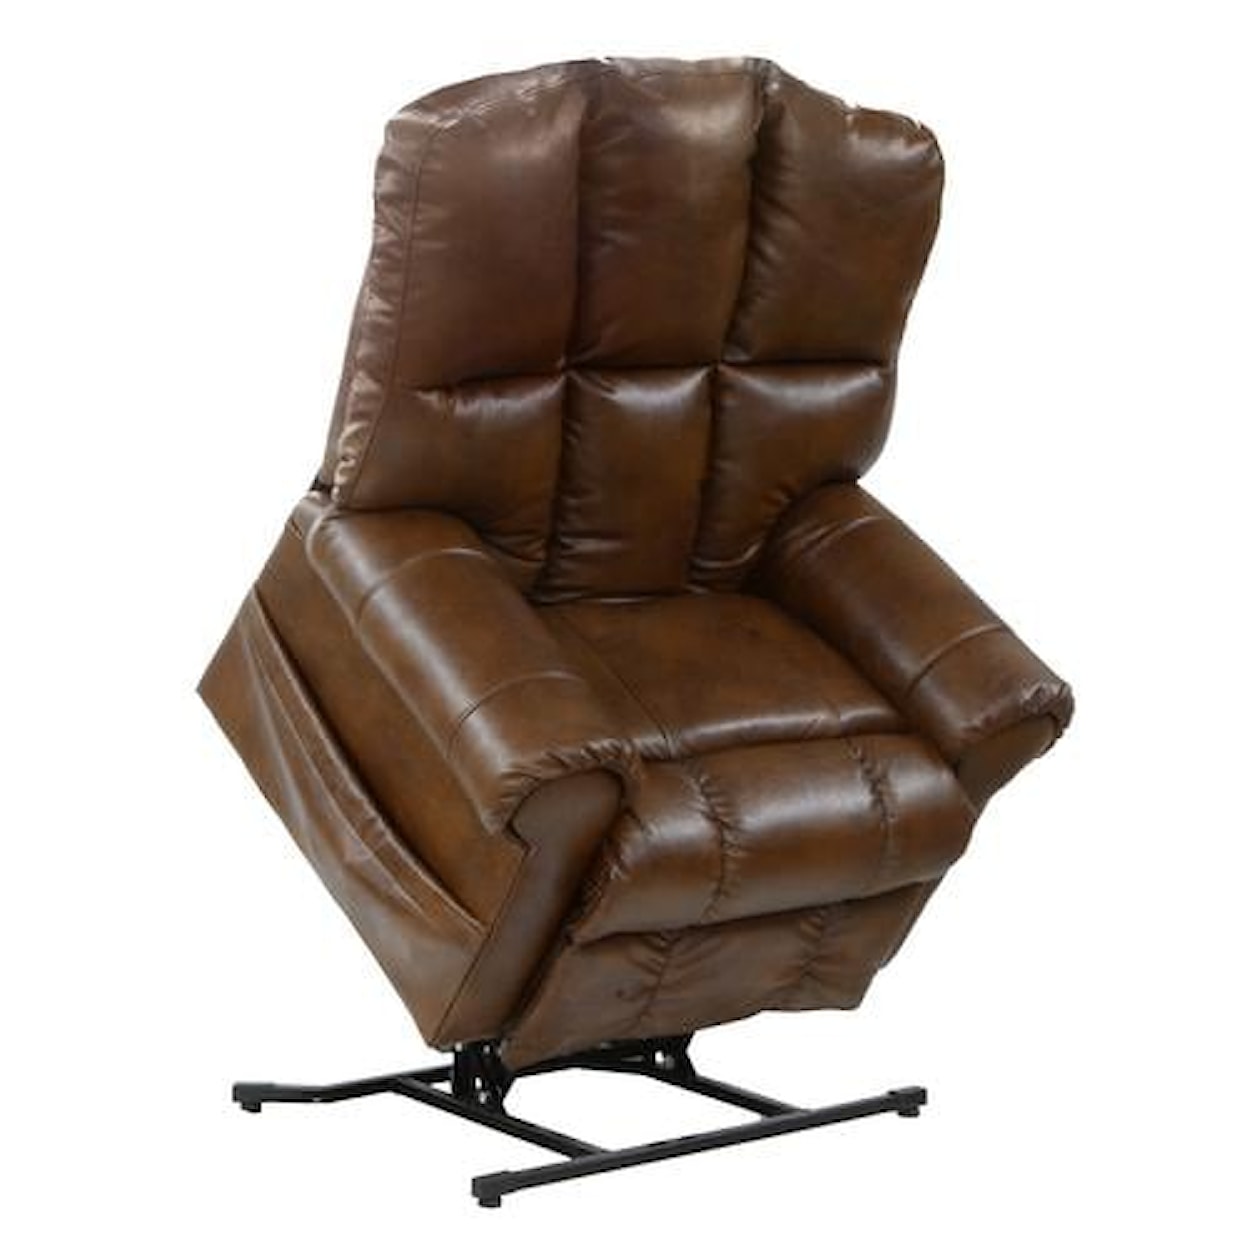 Carolina Furniture 4898 Stallworth Power Lift Full Lay-Out Chaise Recliner